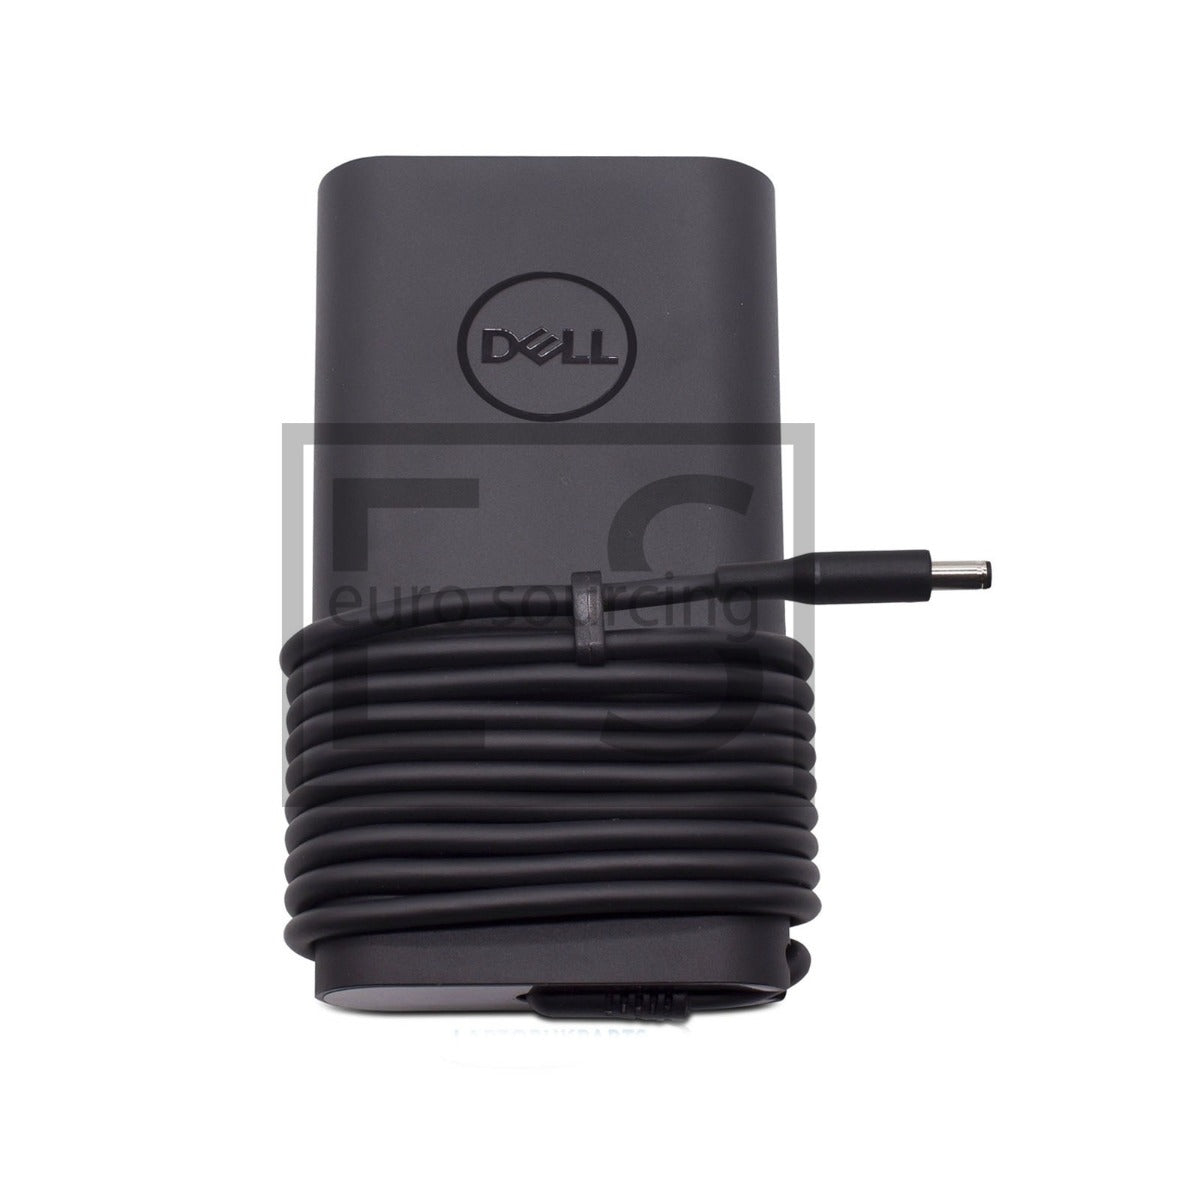 New Genuine Dell 19.5V 6.67A 130W AC Adapter 4.5MM x 3.0MM Power Charger Compatible With DELL XPS 15 9570